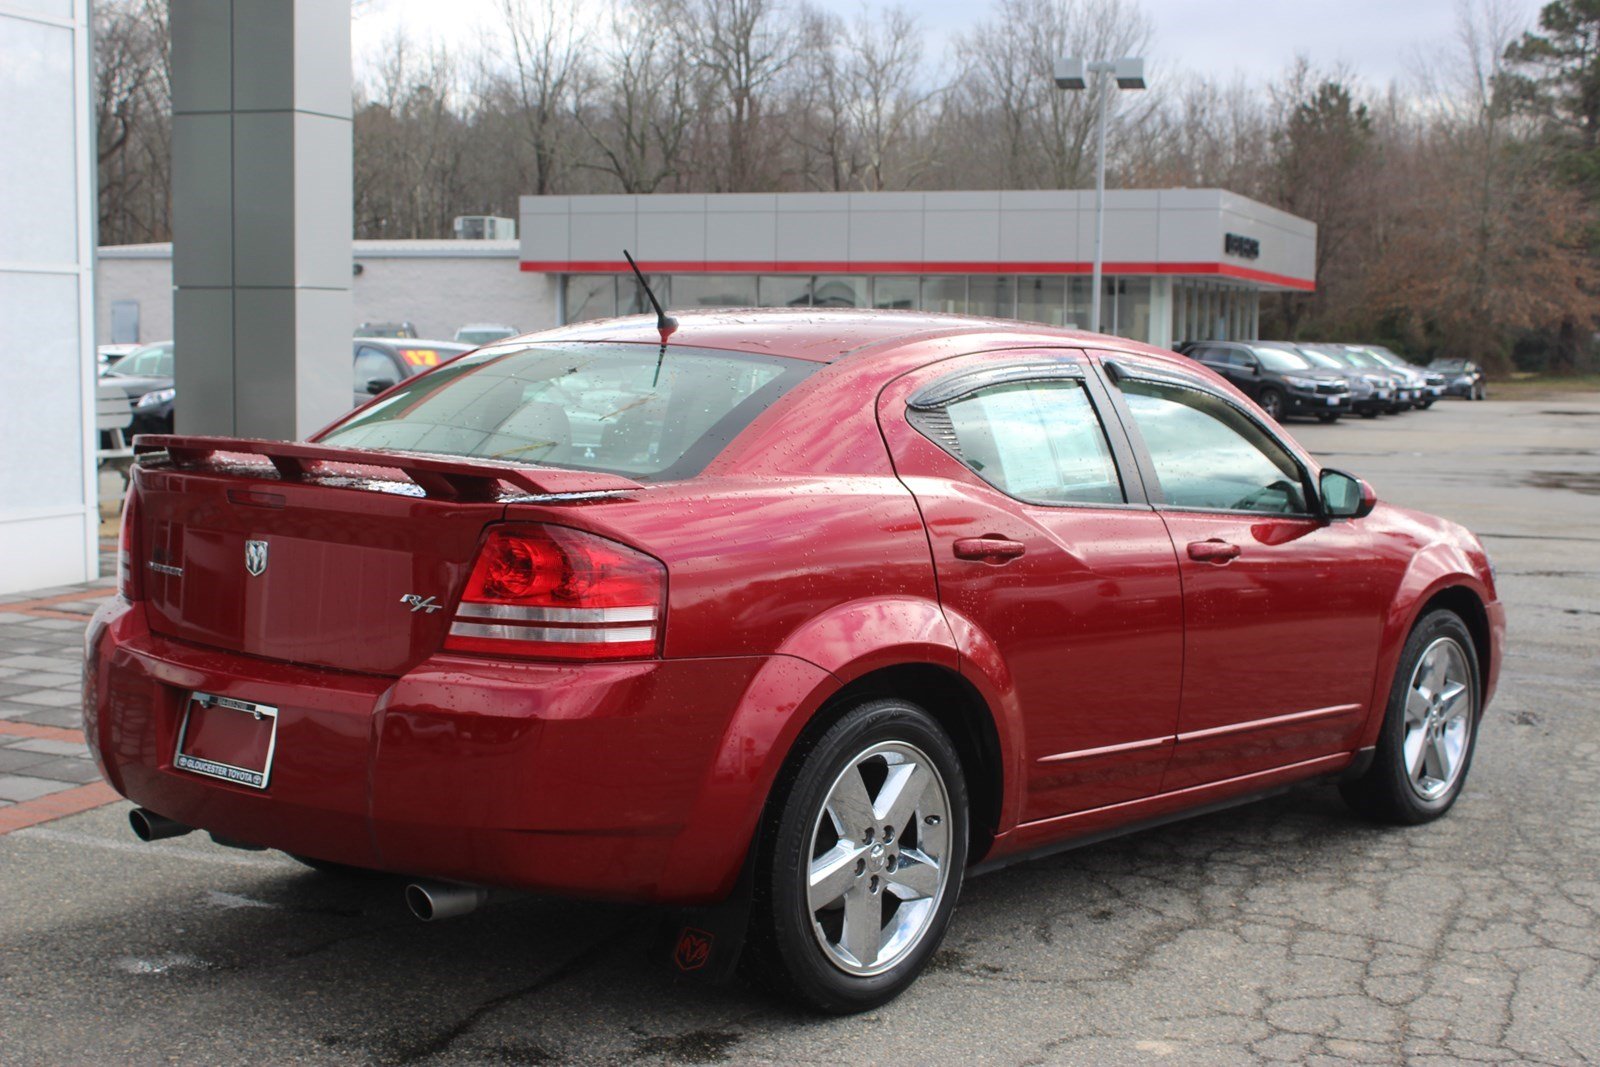 PreOwned 2008 Dodge Avenger R/T 4dr Car in Gloucester 8046A